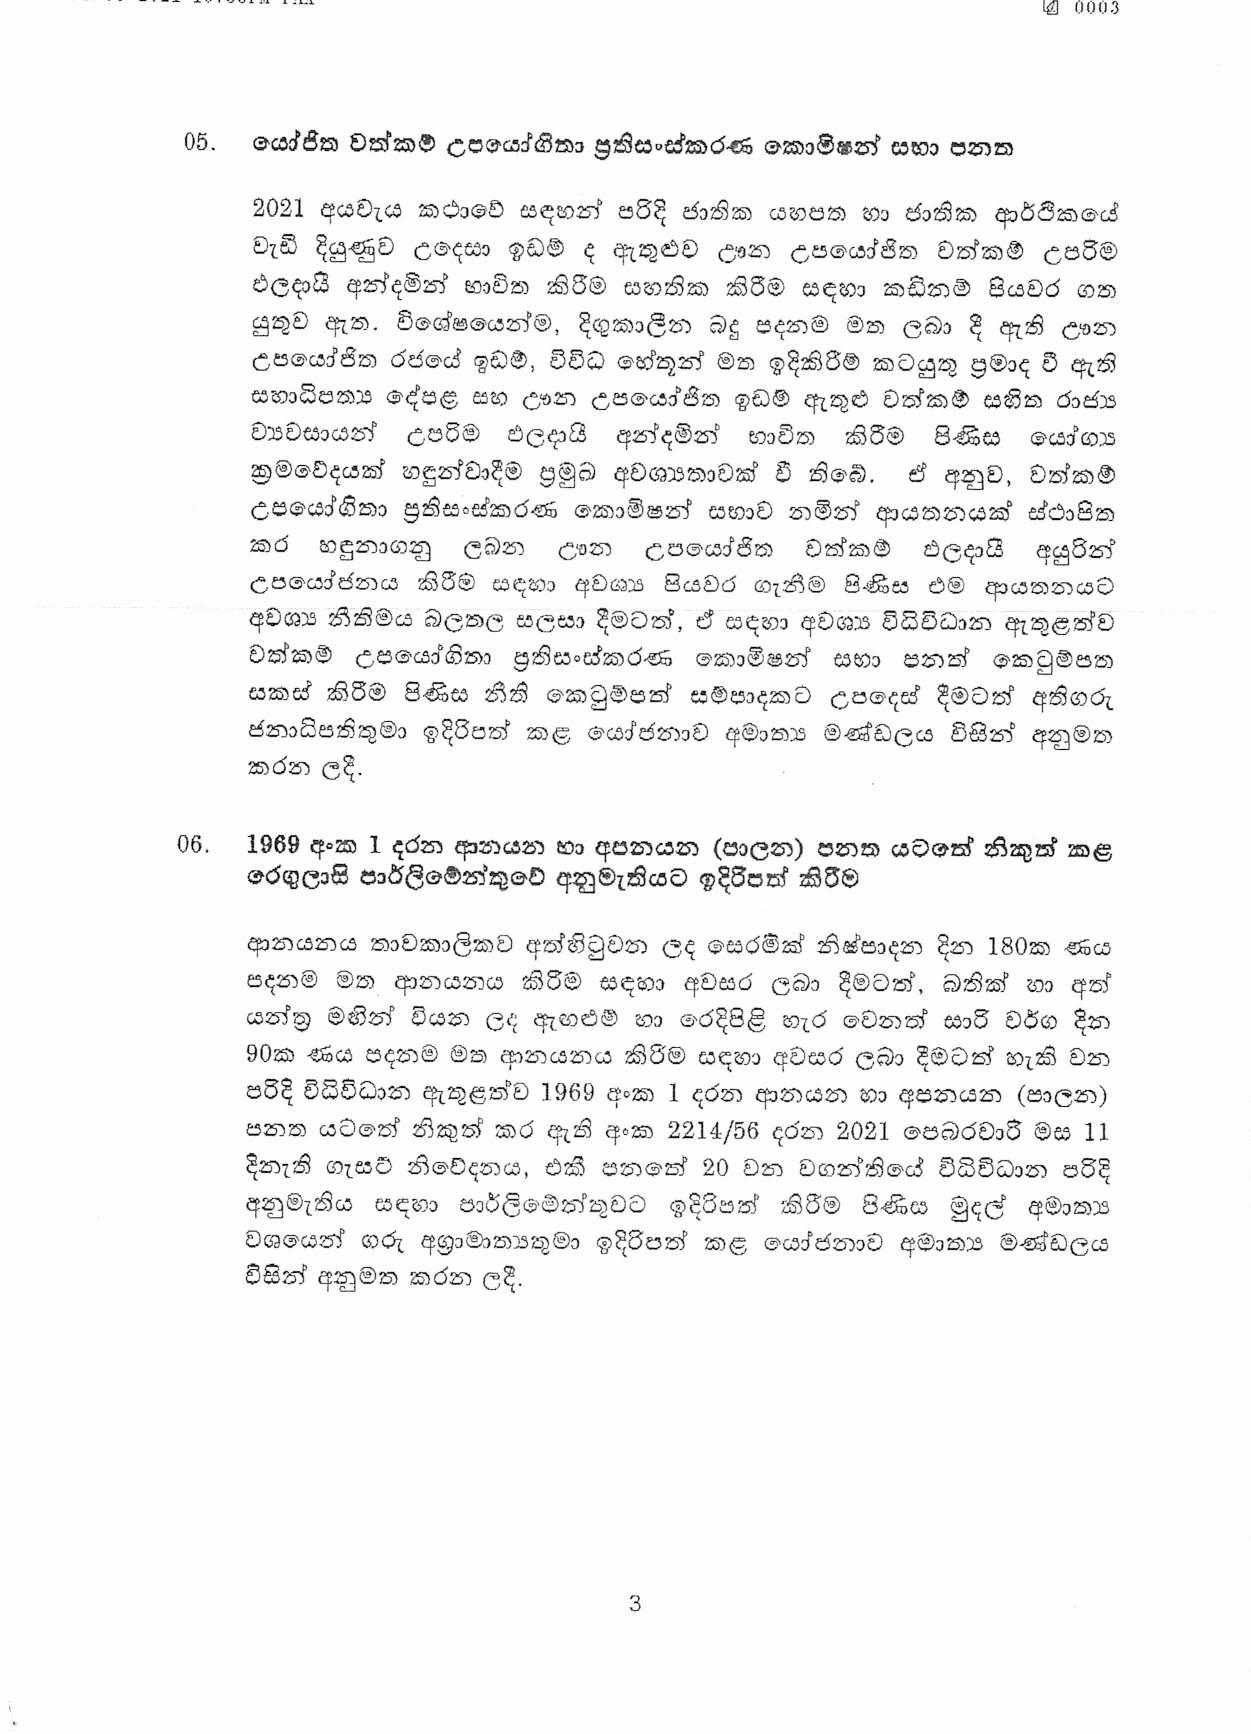 Cabinet Decision on 23.03.2021 Sinhala page 003